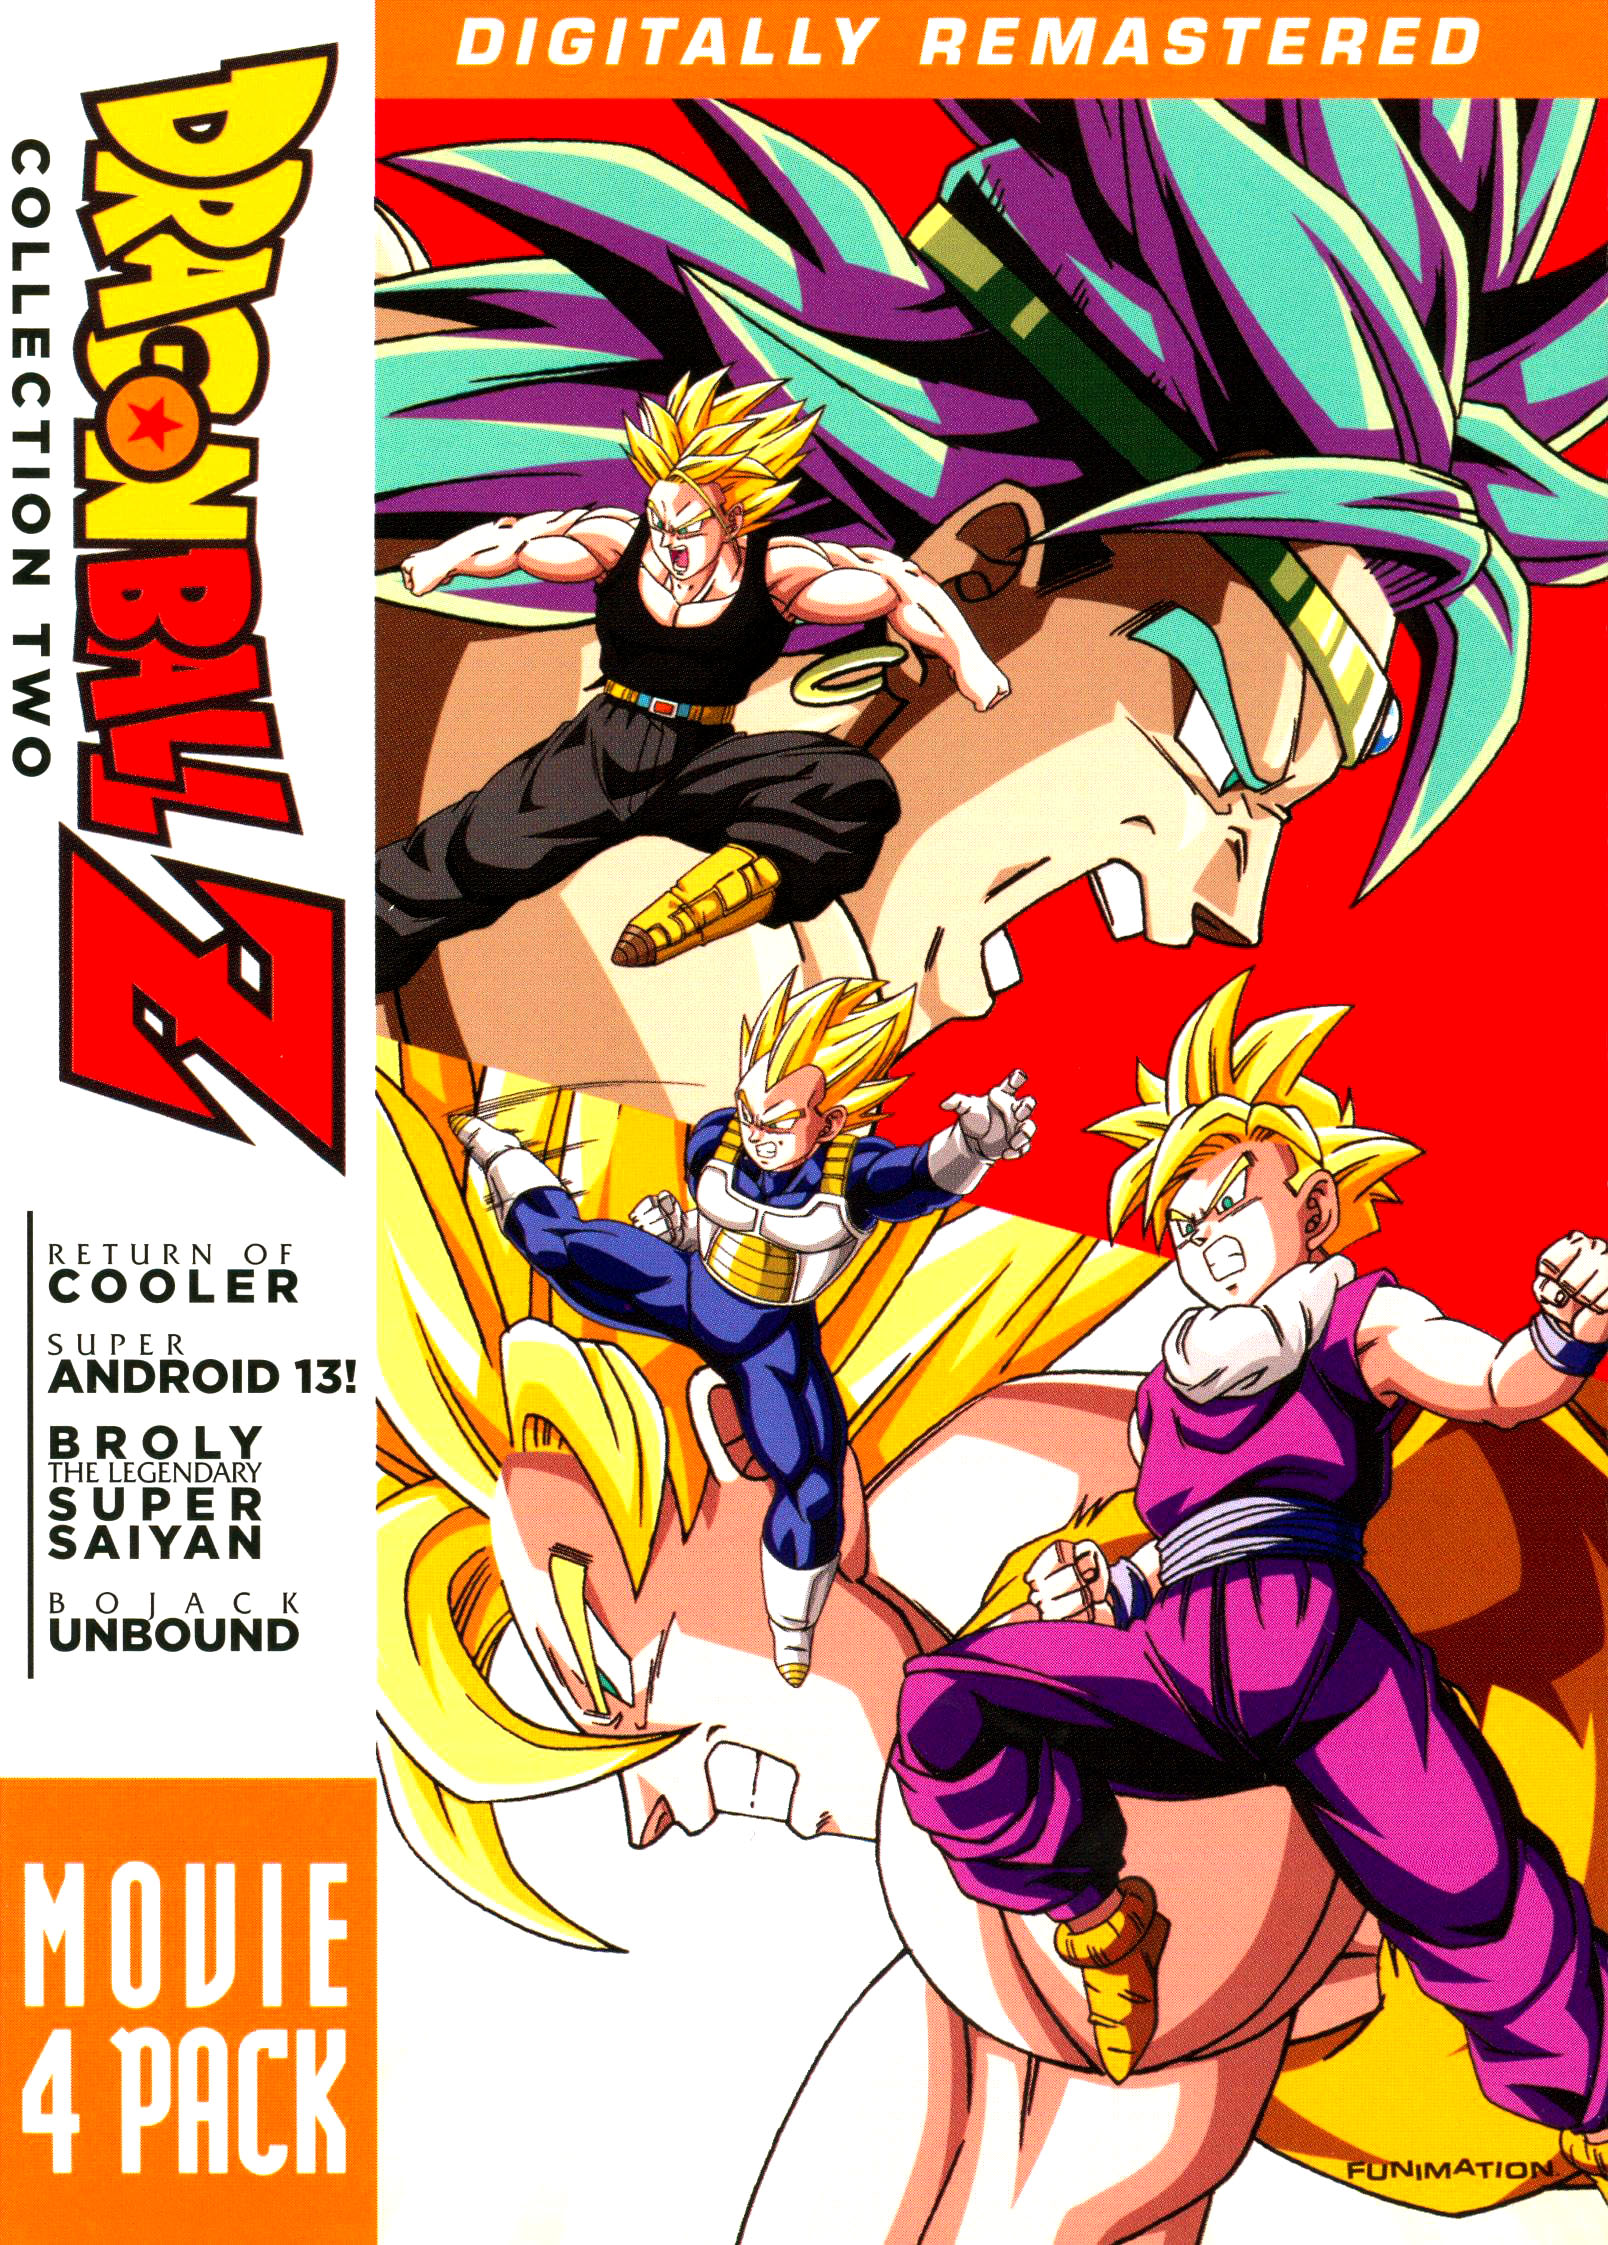 DragonBall Z: Movie 4 Pack Collection Two [4 Discs] - Best Buy